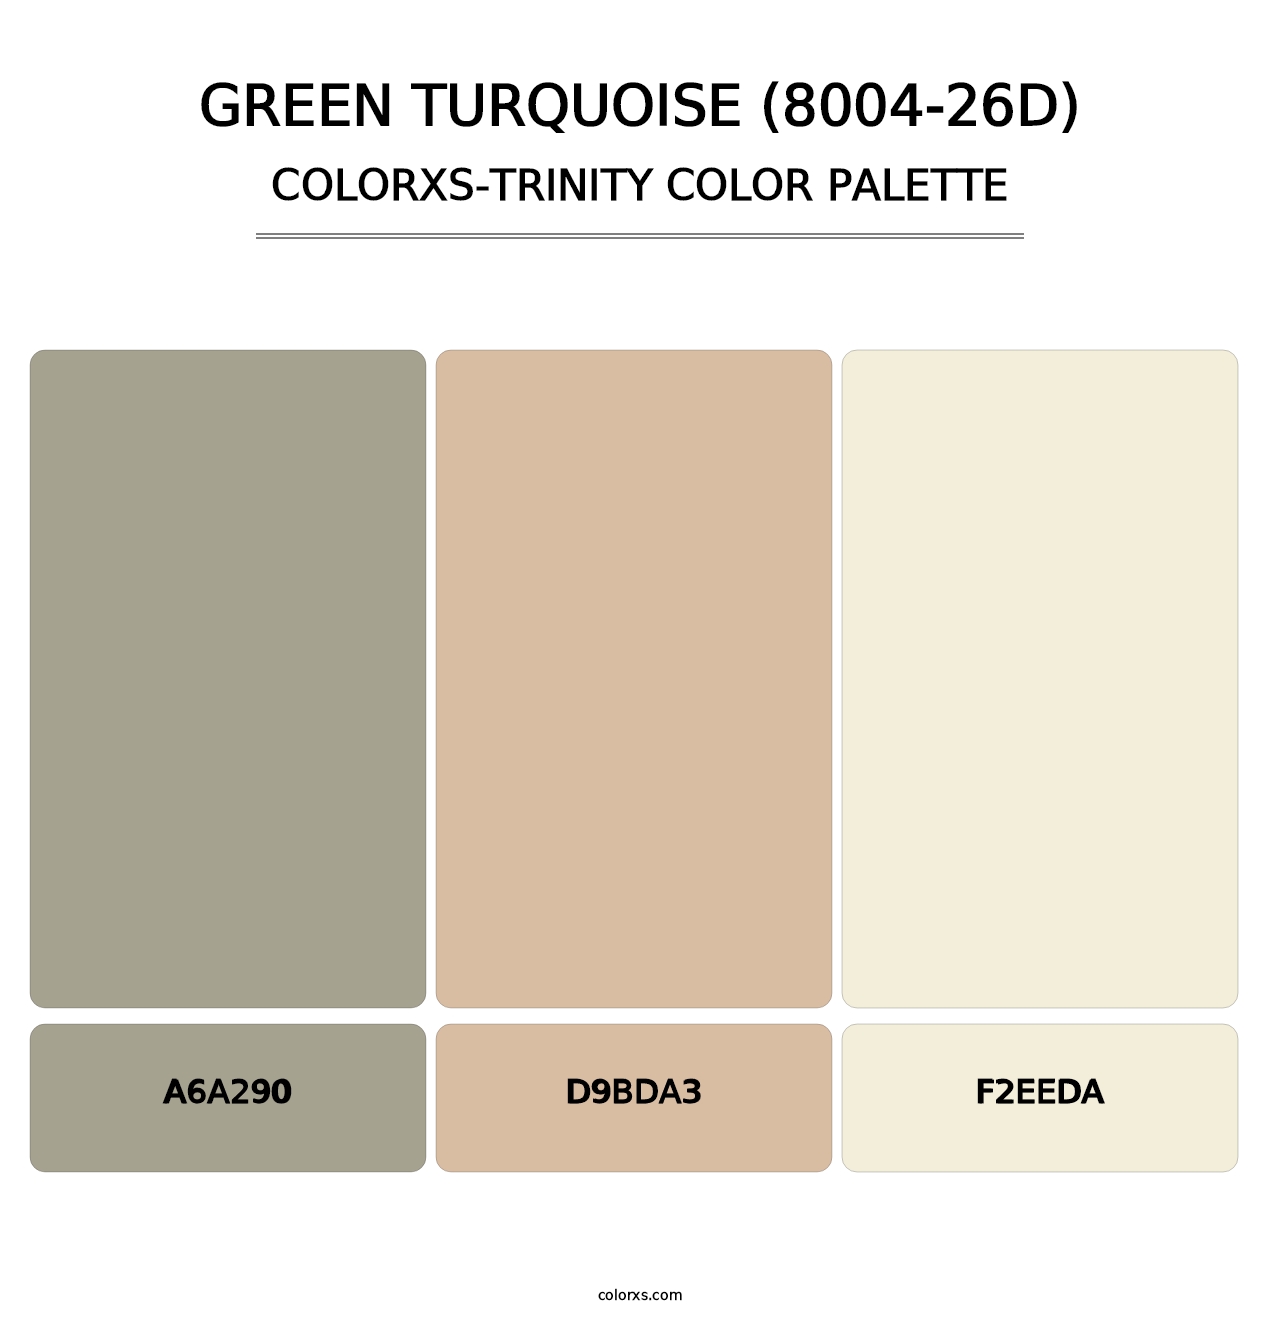 Green Turquoise (8004-26D) - Colorxs Trinity Palette